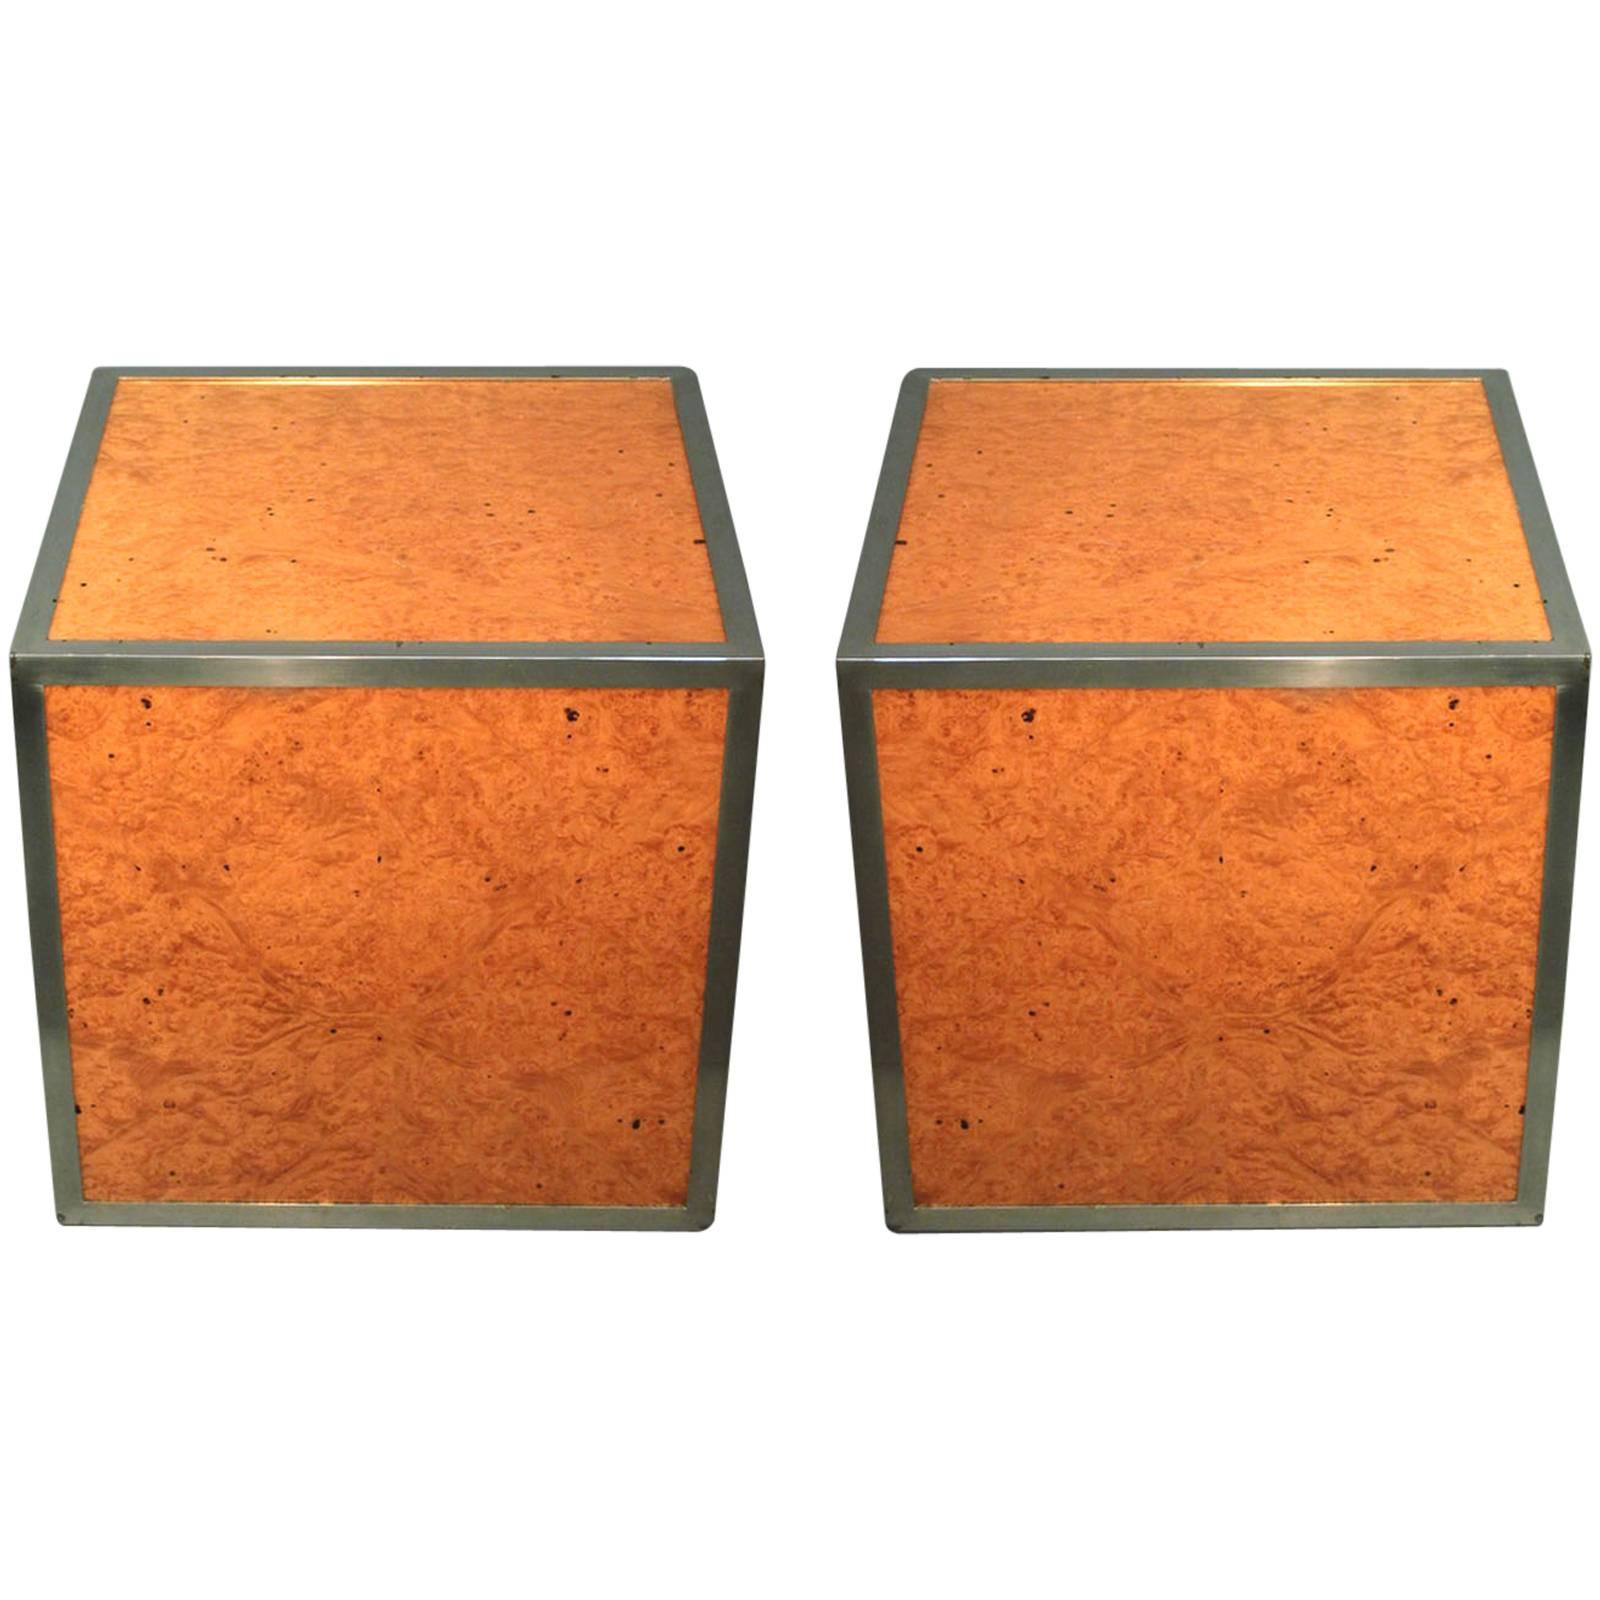 Pair of 1970s Pedestals or End Tables in Burr Elm and Chrome